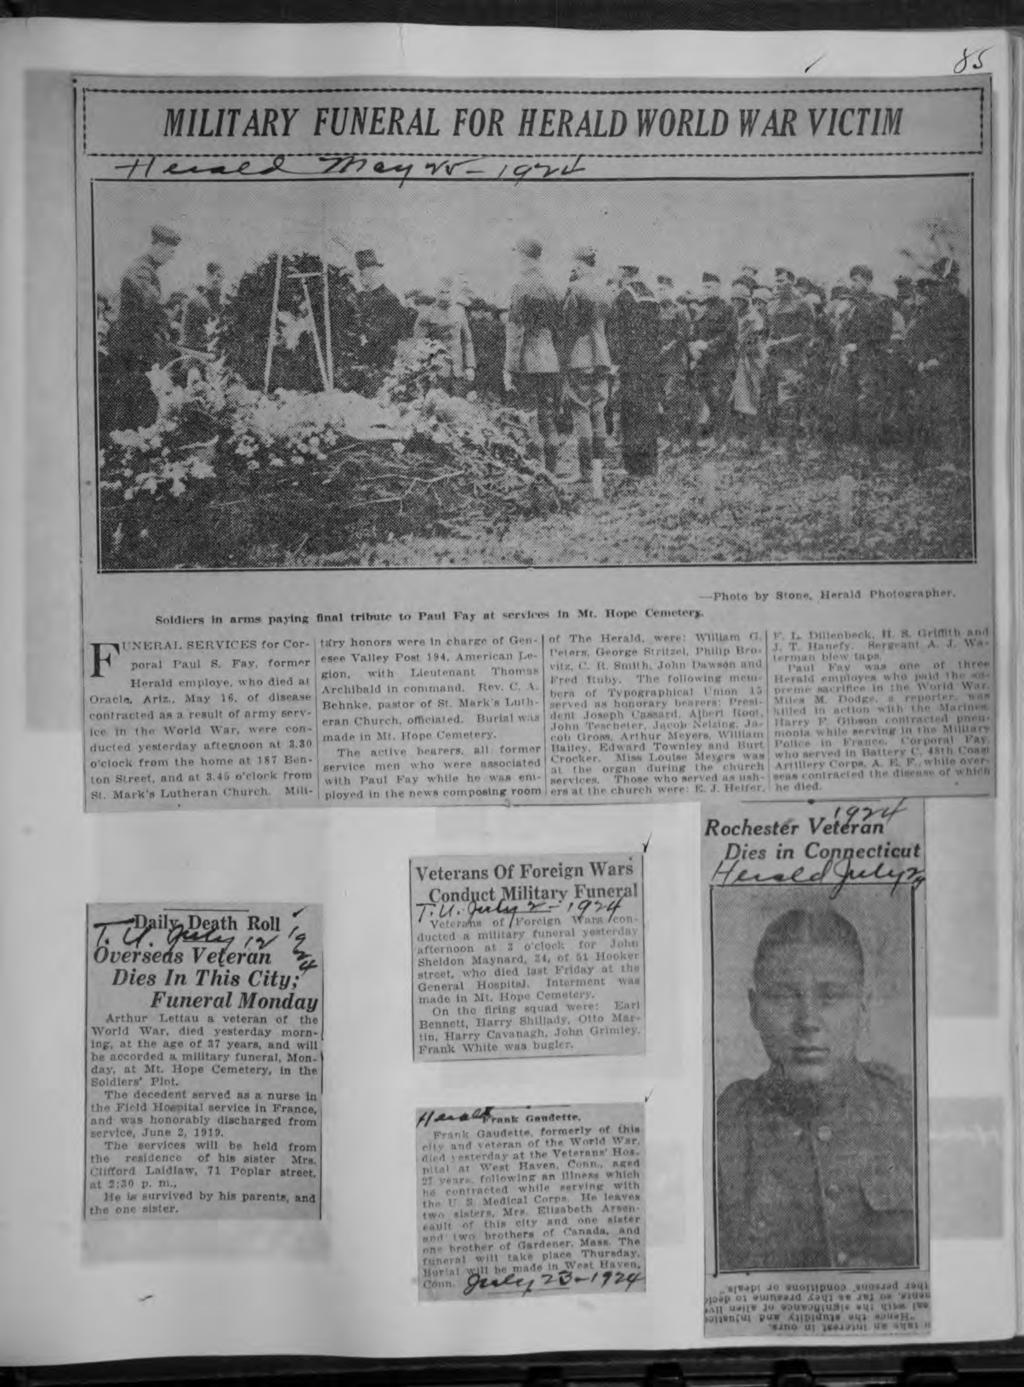 Ed* ouae MLTARY FUNERAL FOR HERALD WORLD WAR VCTM "1 / PhOtO by Stone He Solders n arm* payng fnal trbute t Paul Fay at servces n Mt Hope ( Vm<tr> FUNERAL SERVCES for Cor poral Paul R Fay former